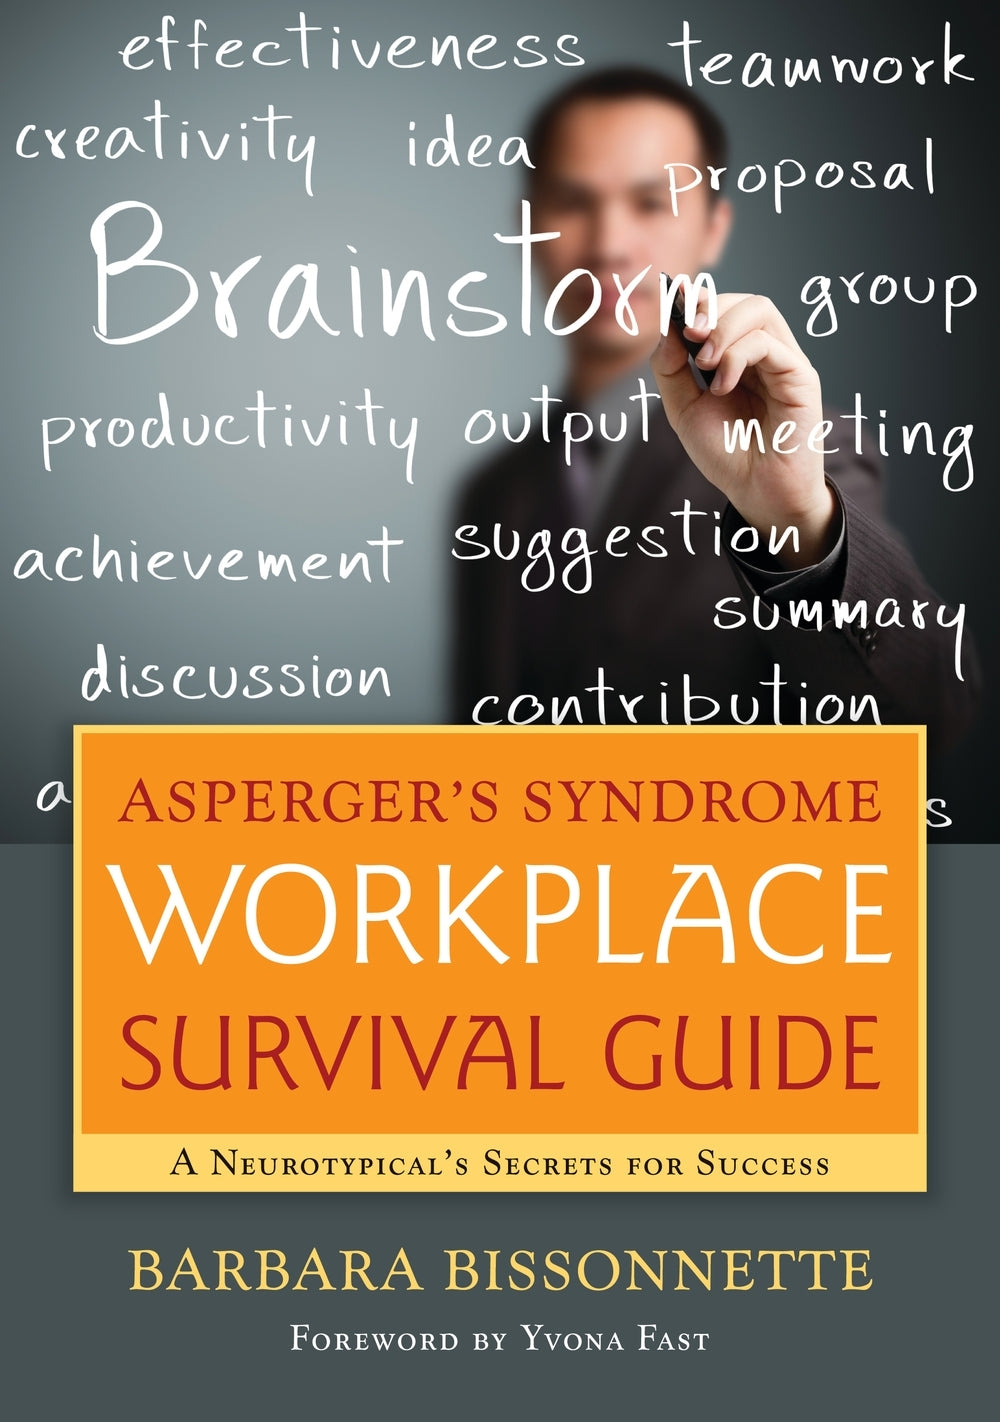 Asperger's Syndrome Workplace Survival Guide by Yvona Fast, Barbara Bissonnette